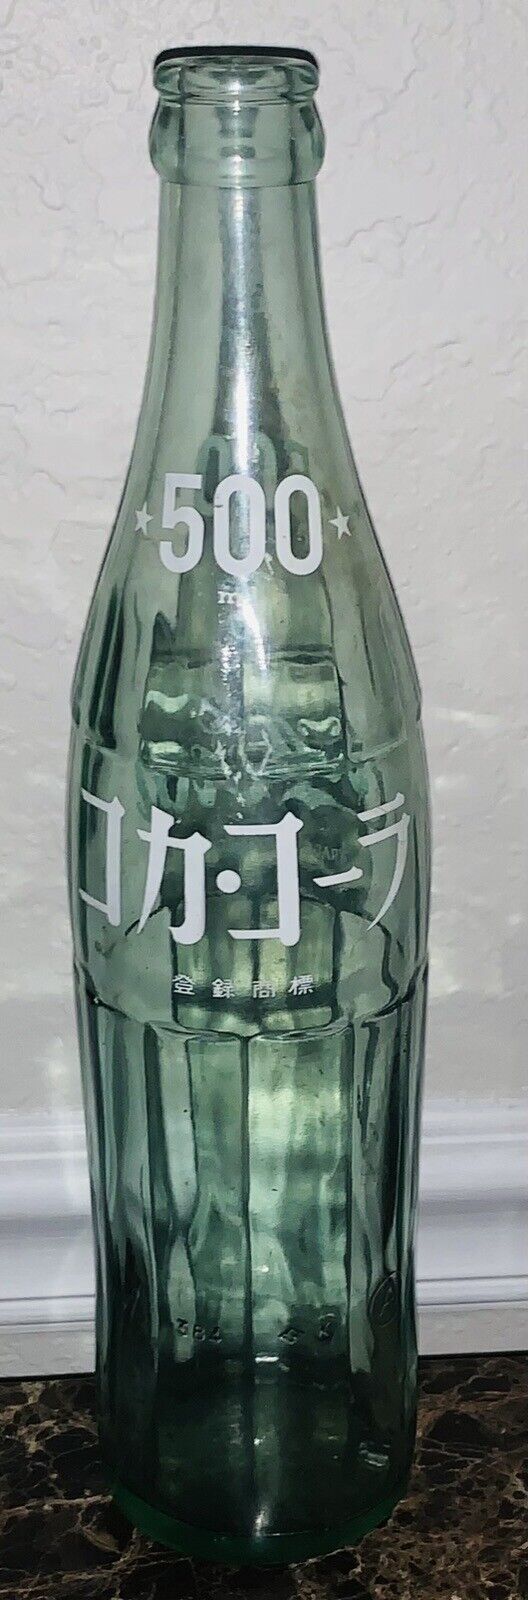 Vintage Japanese Coca Cola Bottle 500 ml Green Tint Empty 11 Inches USA Shipper